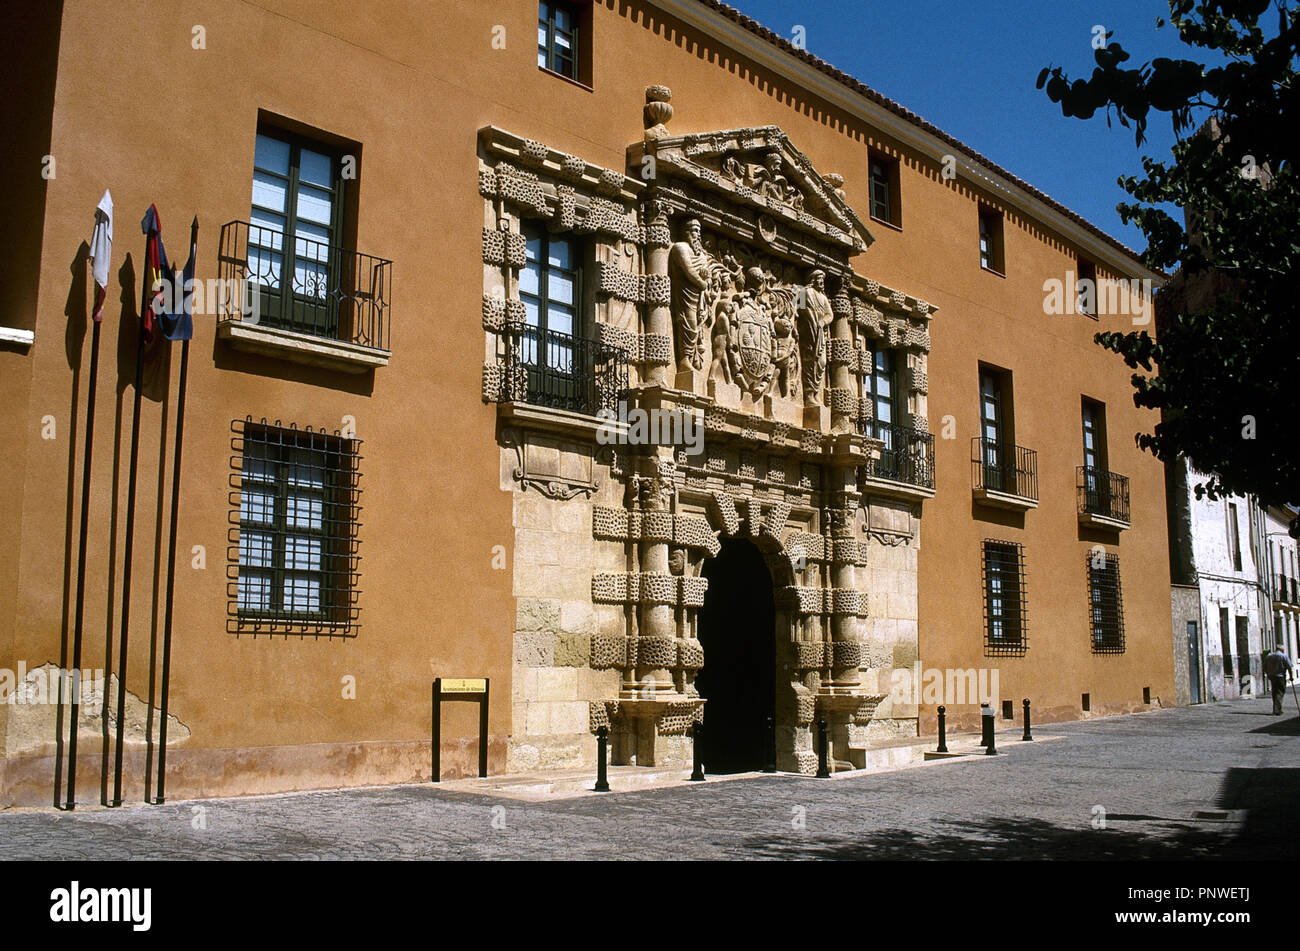 Spain. Almansa. City Hall. Located in the Big House or Palace of the Counts of Cirat, built in the 16th century in Mannerist style. Main facade. Stock Photo